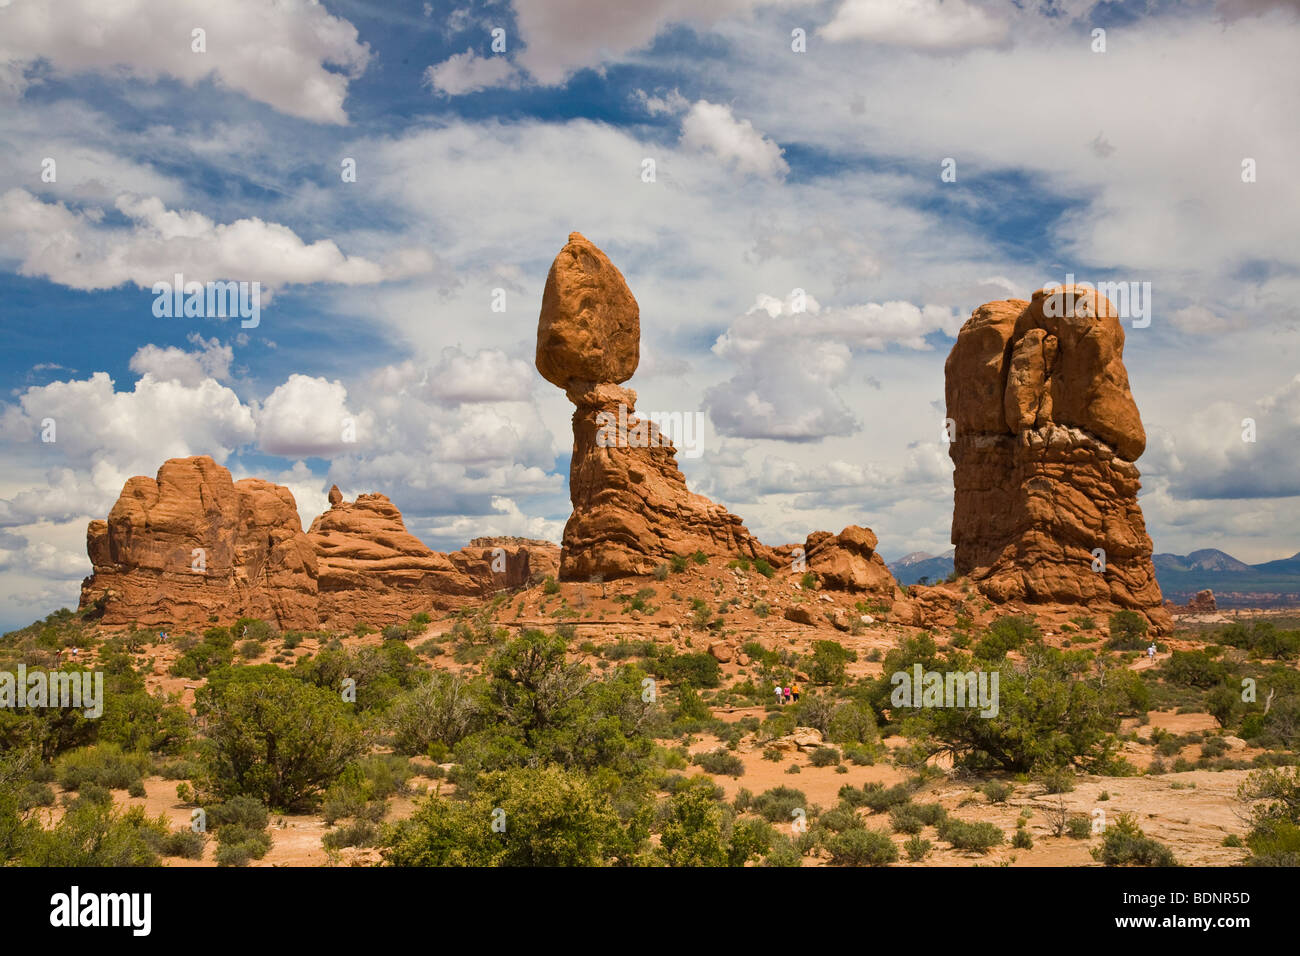 Balanced Rock sandstone formation in Arches National Park, Moab, Utah, United States Stock Photo